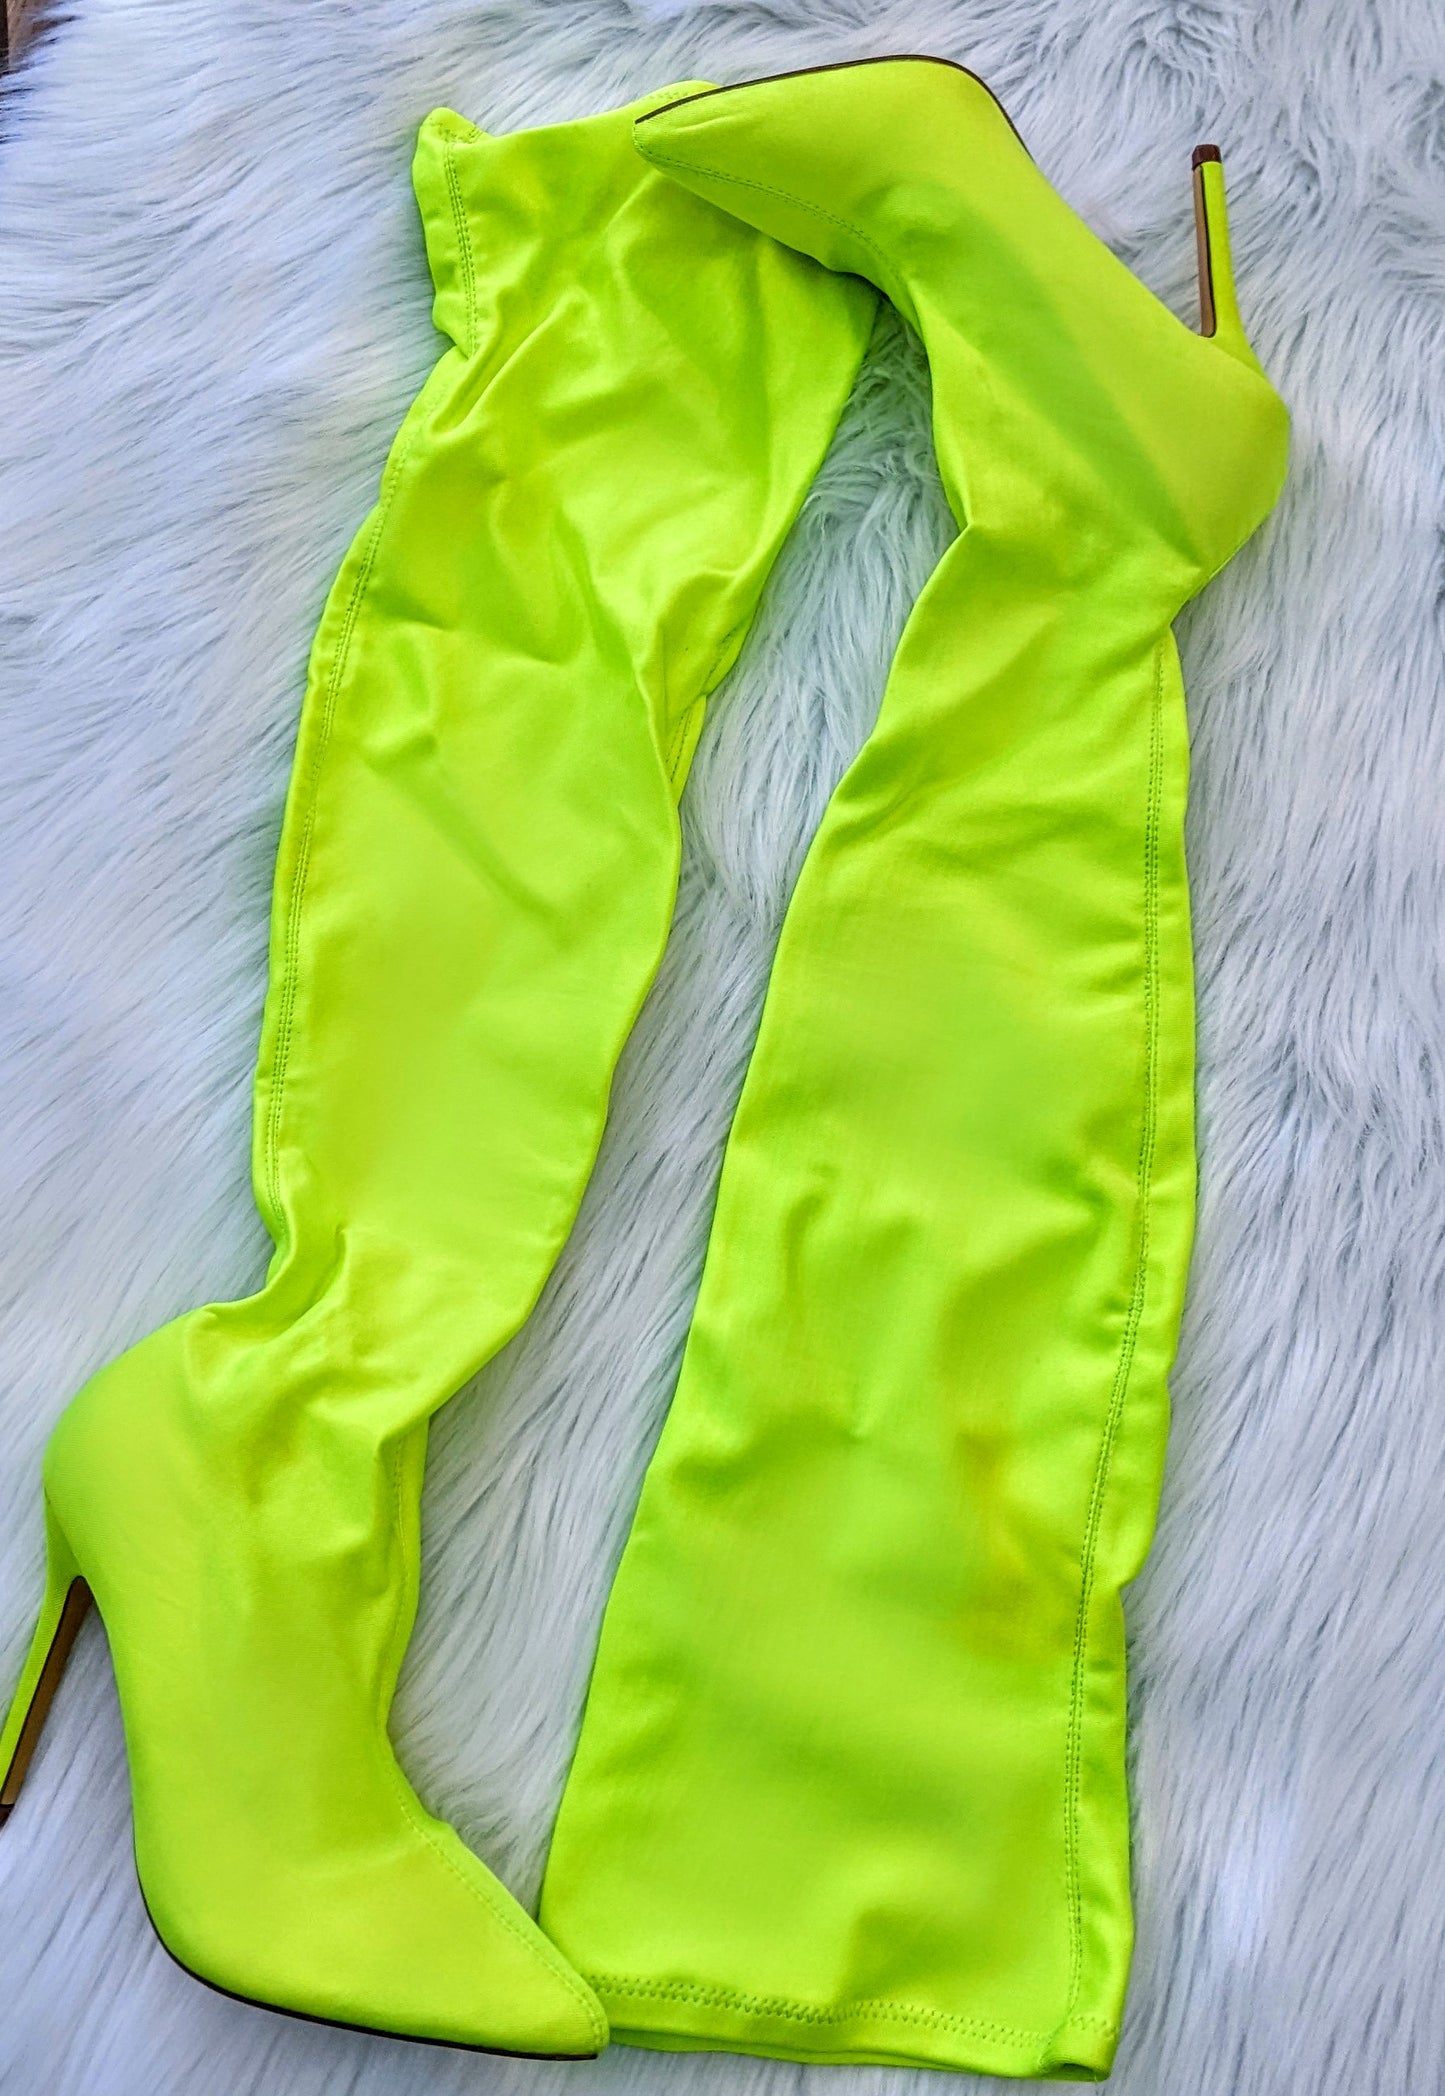 Neon Stretch ThighHigh Boots (Sale)